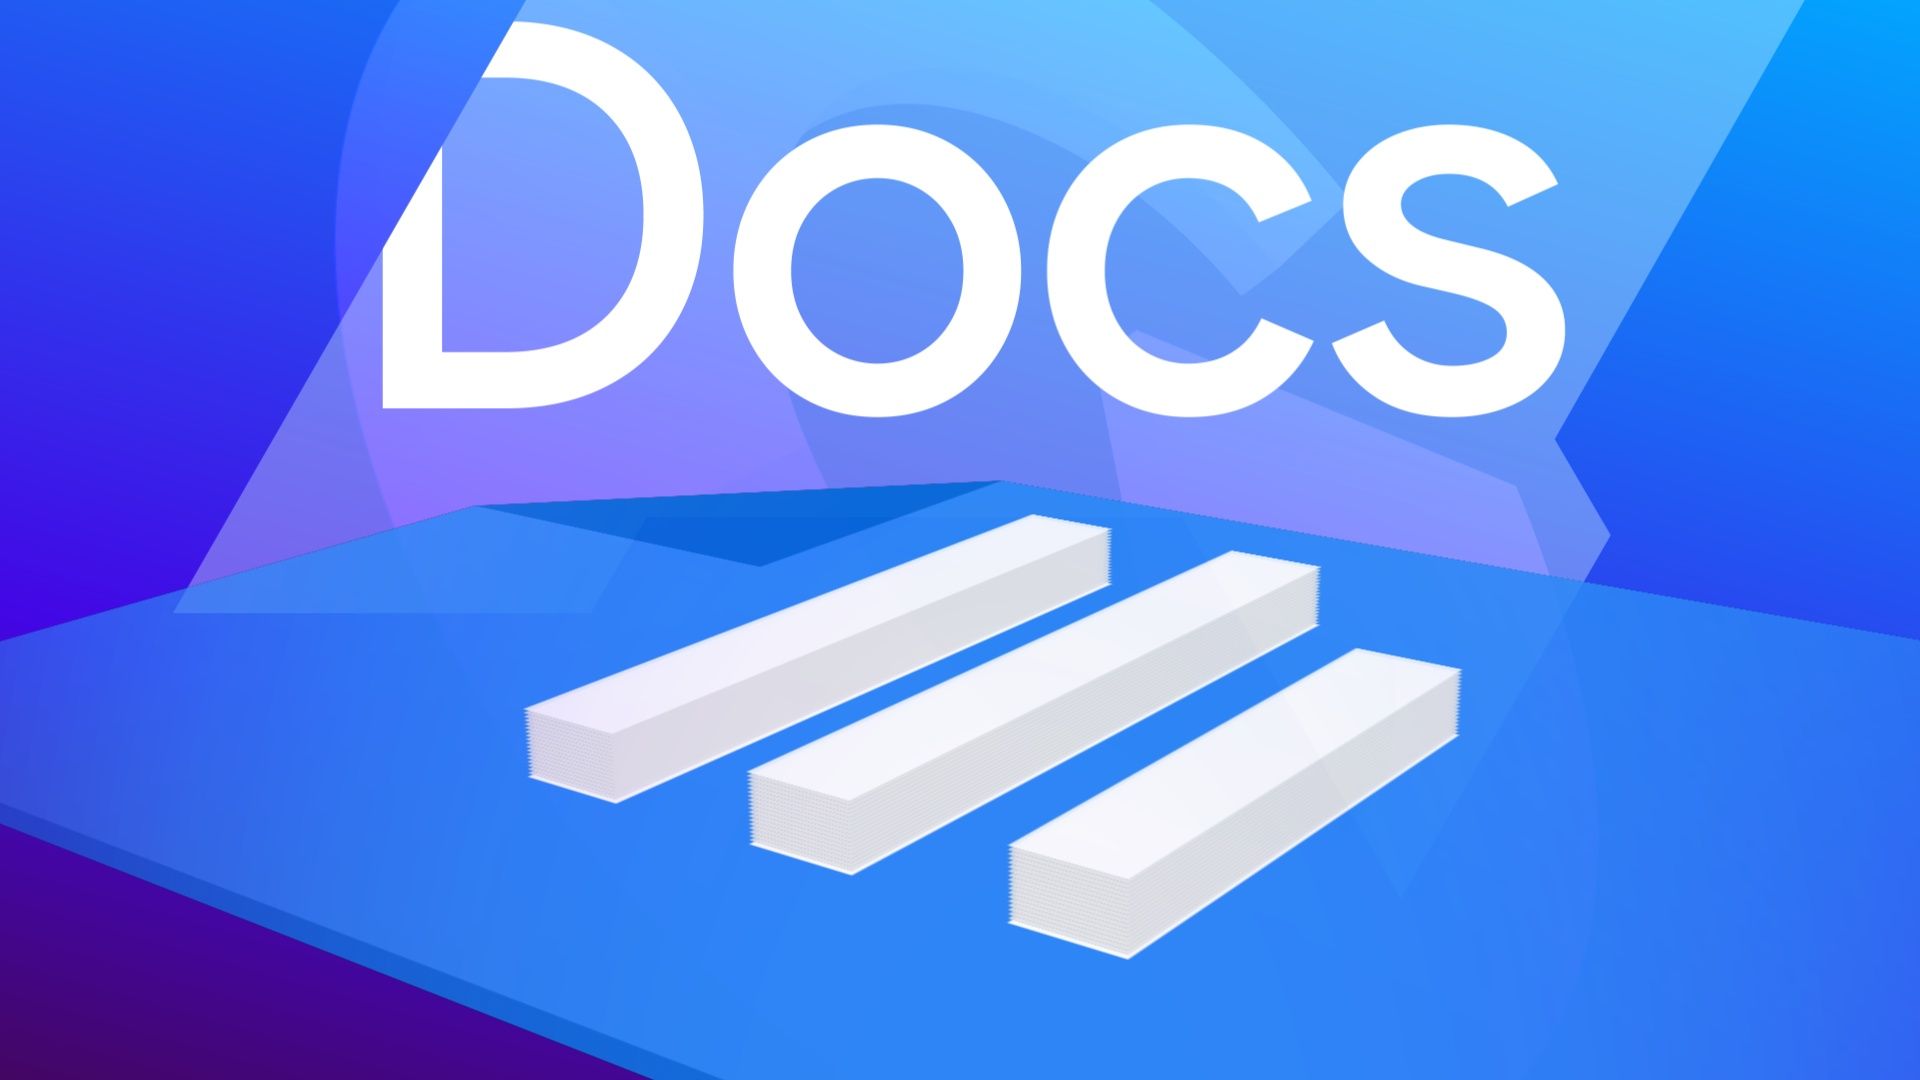 The Google Docs logo with the word 